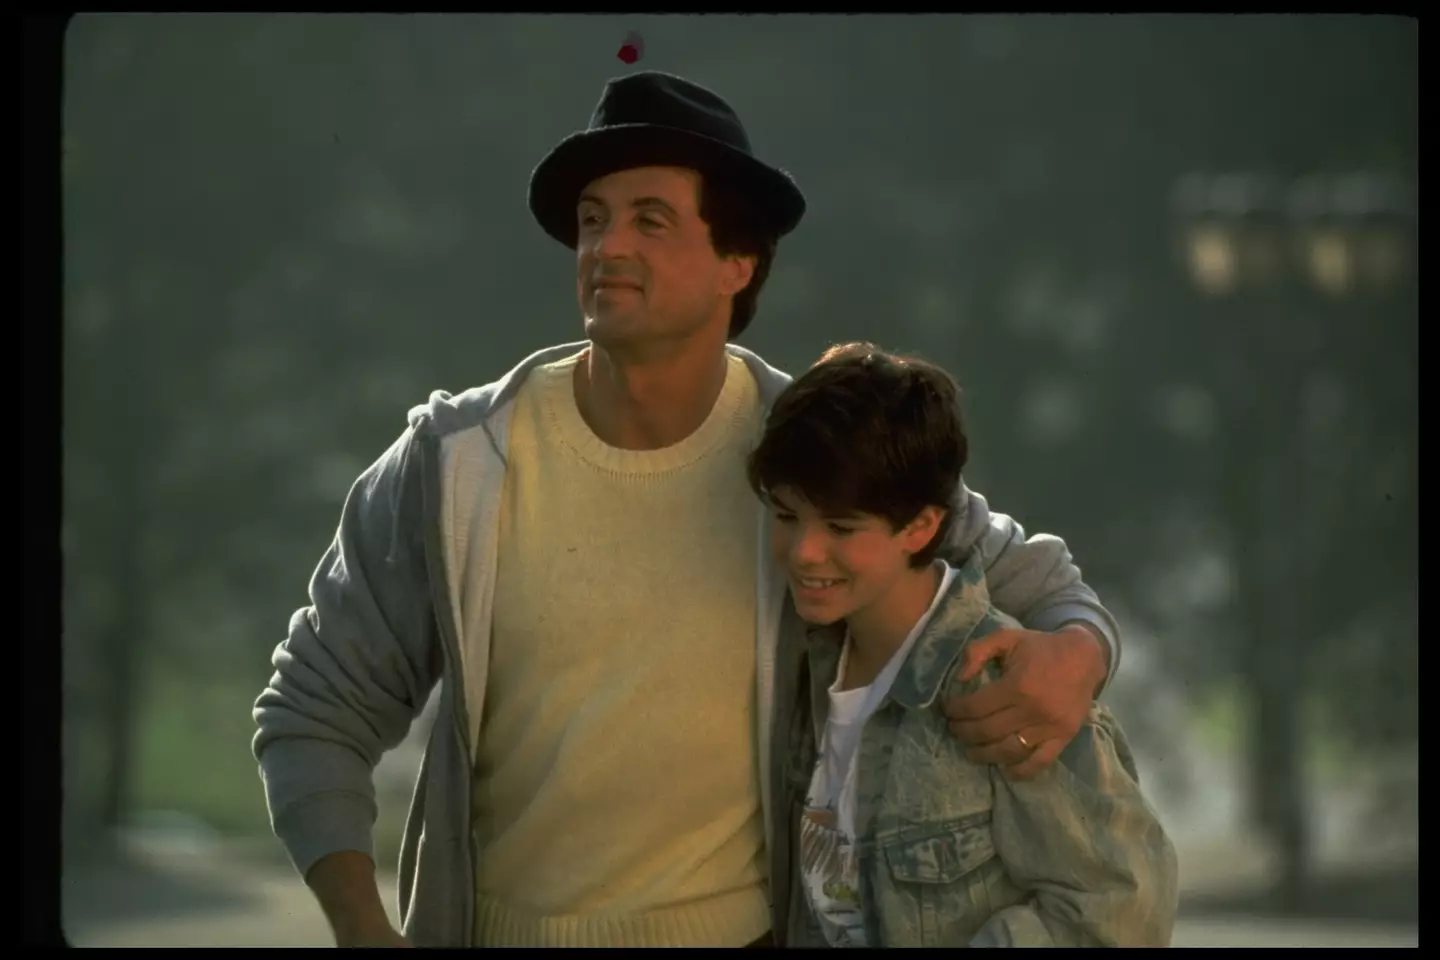 Sylvester and Sage Stallone starred in Rocky V together.